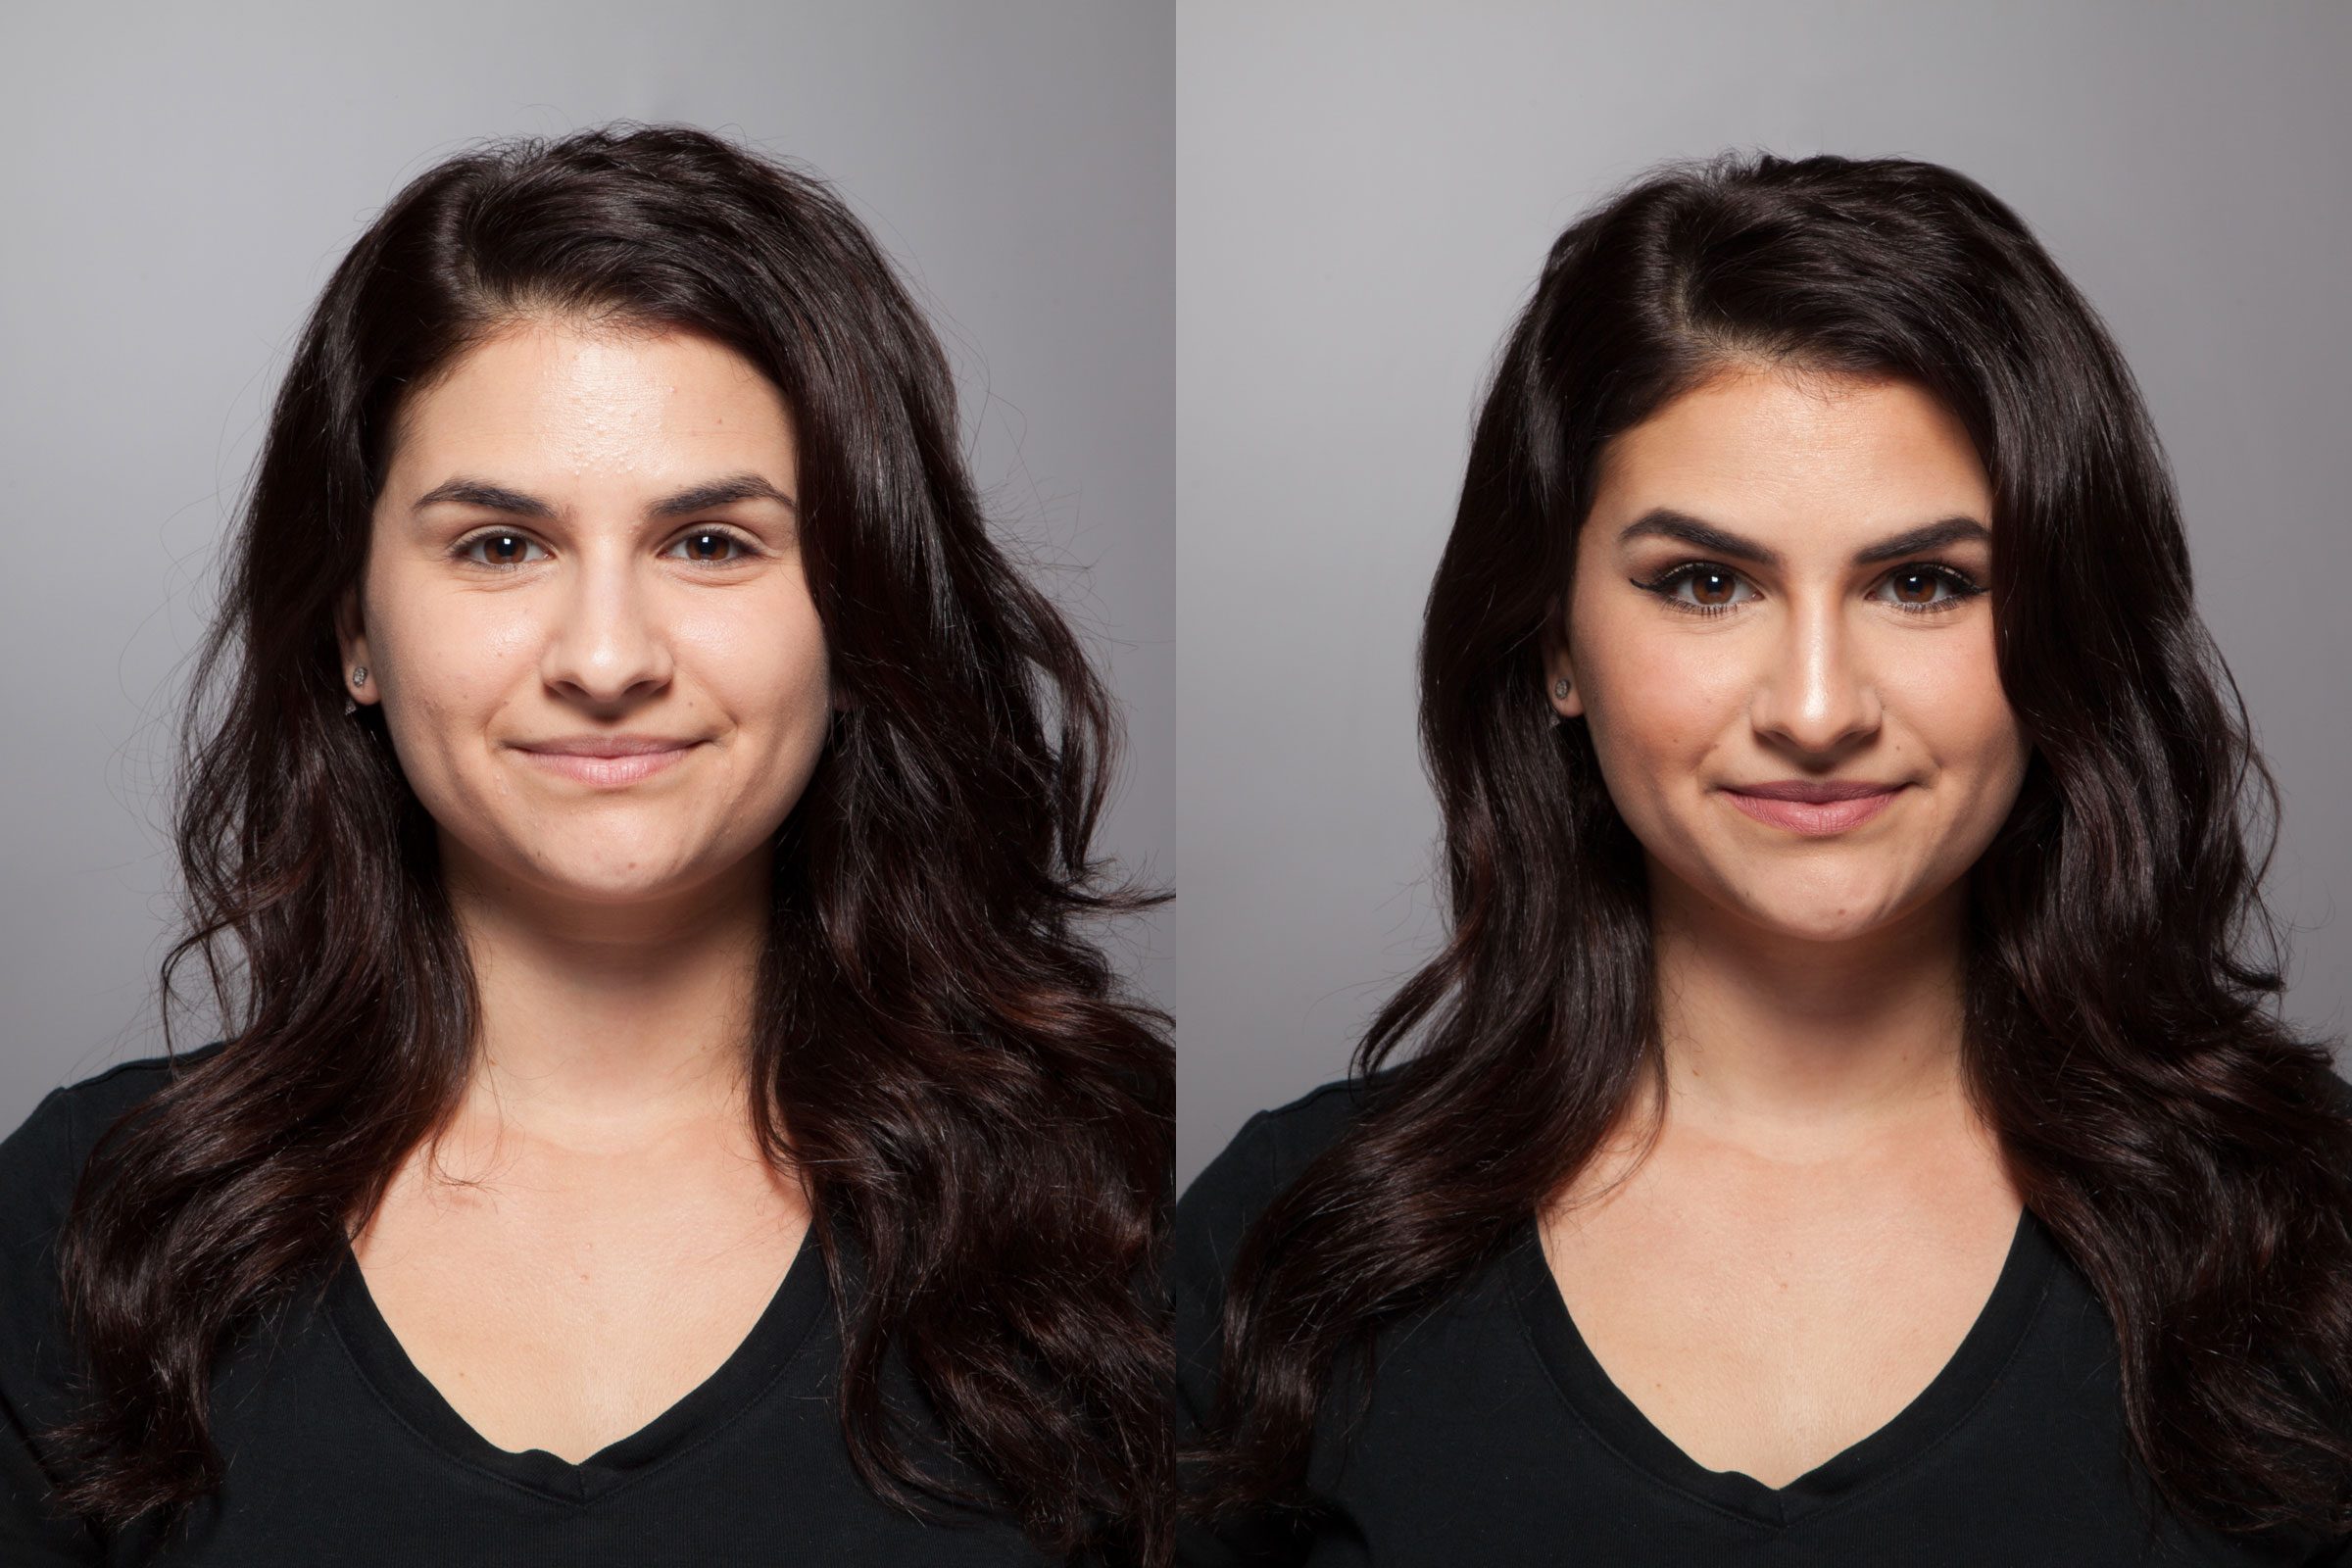 09 Makeup Tricks Thinner Before After ?fit=640%2C427